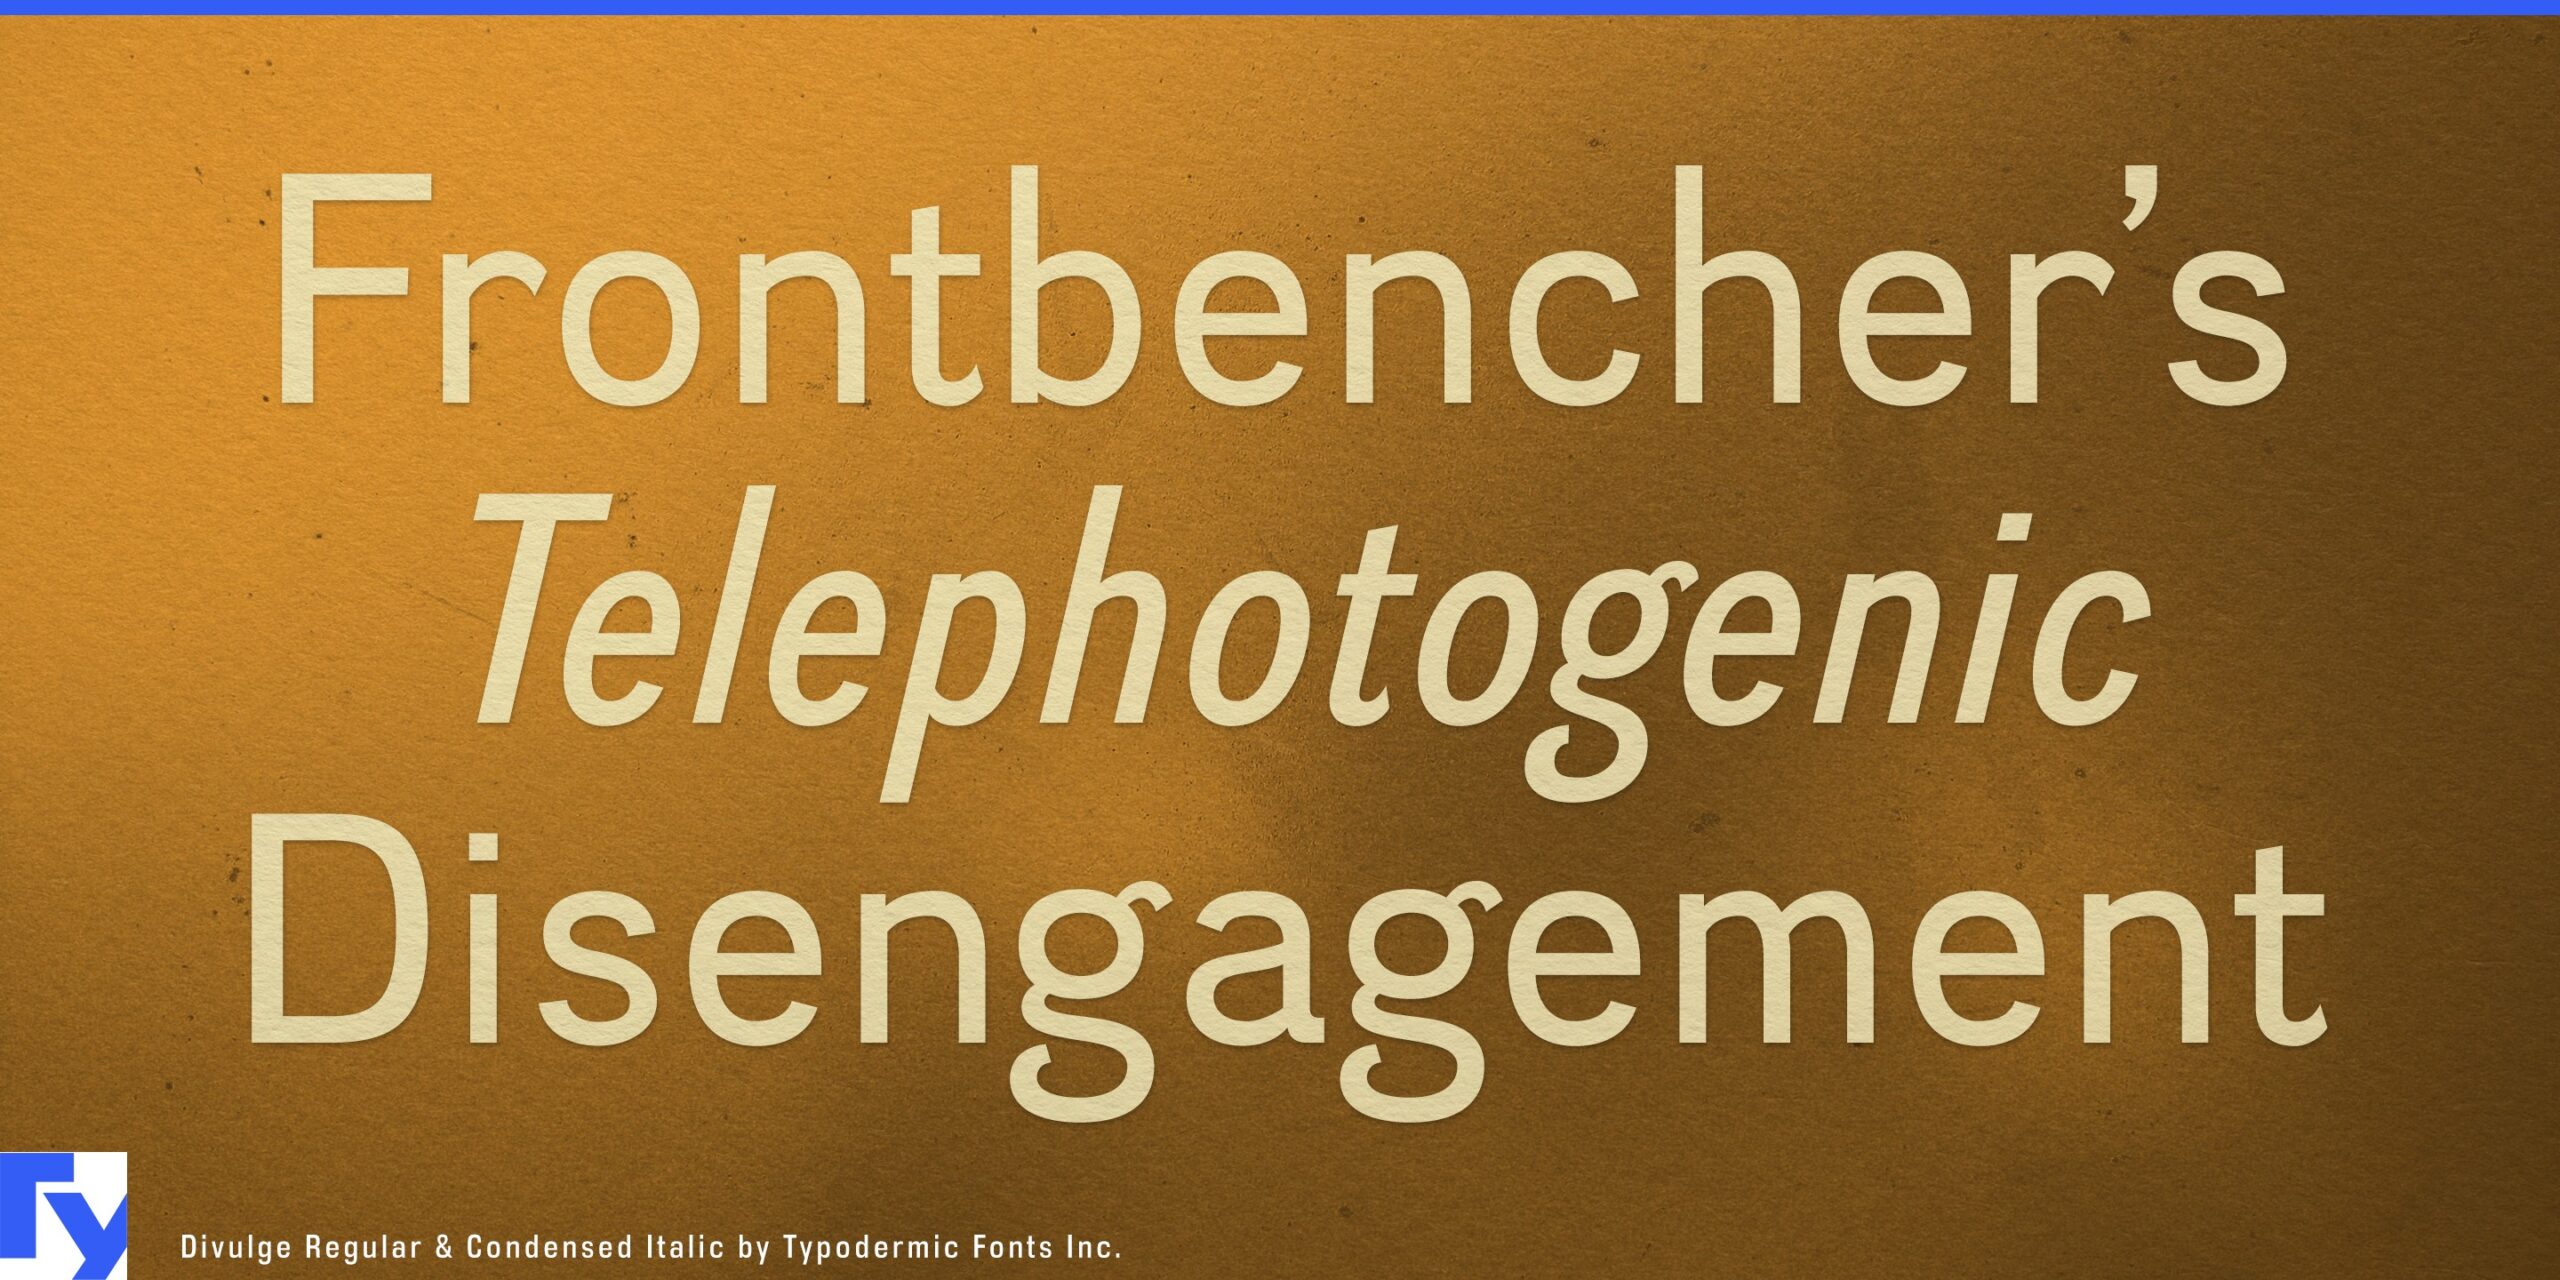 Weighted Elegance: Explore the Versatility of Divulge Typeface